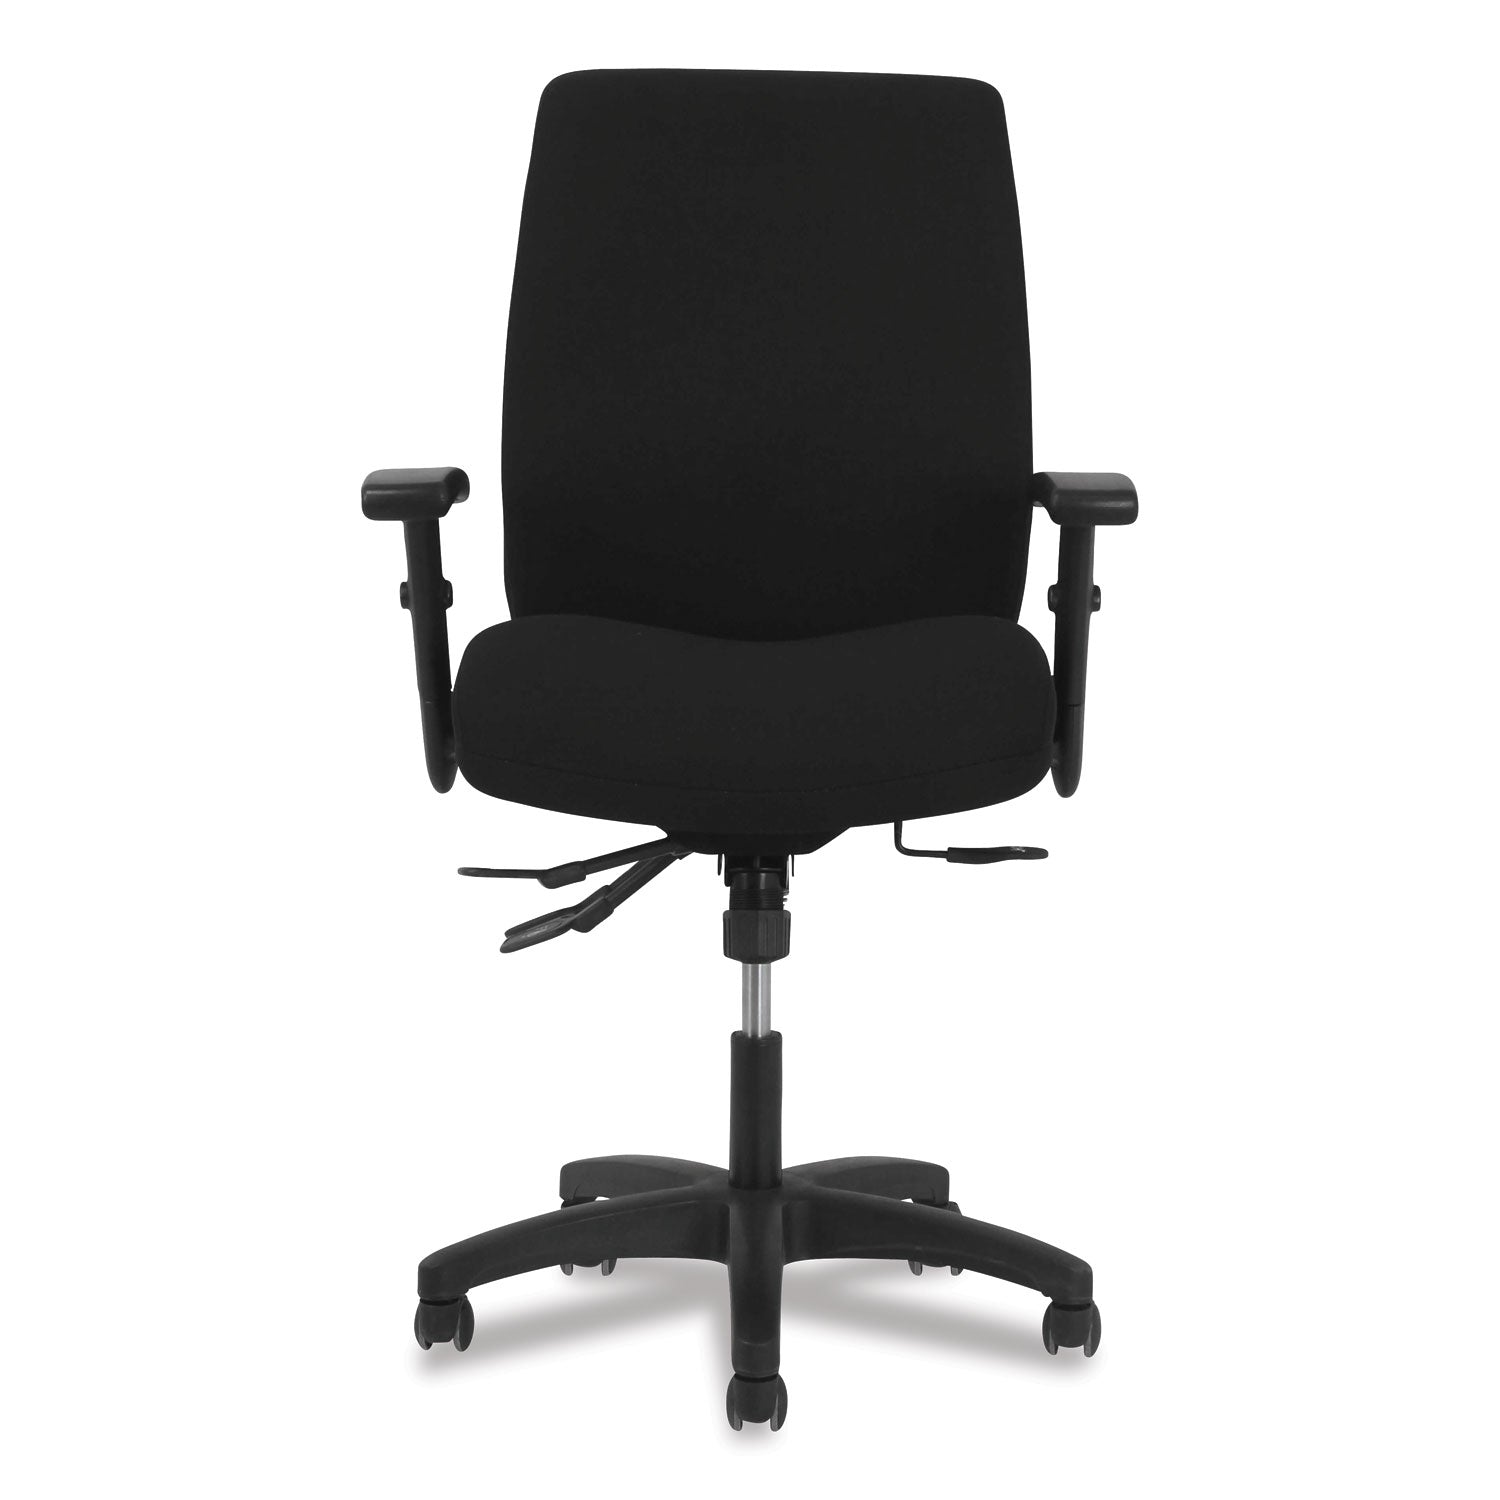 network-high-back-chair-supports-up-to-250-lb-183-to-228-seat-height-black_honvl283a2va10t - 2